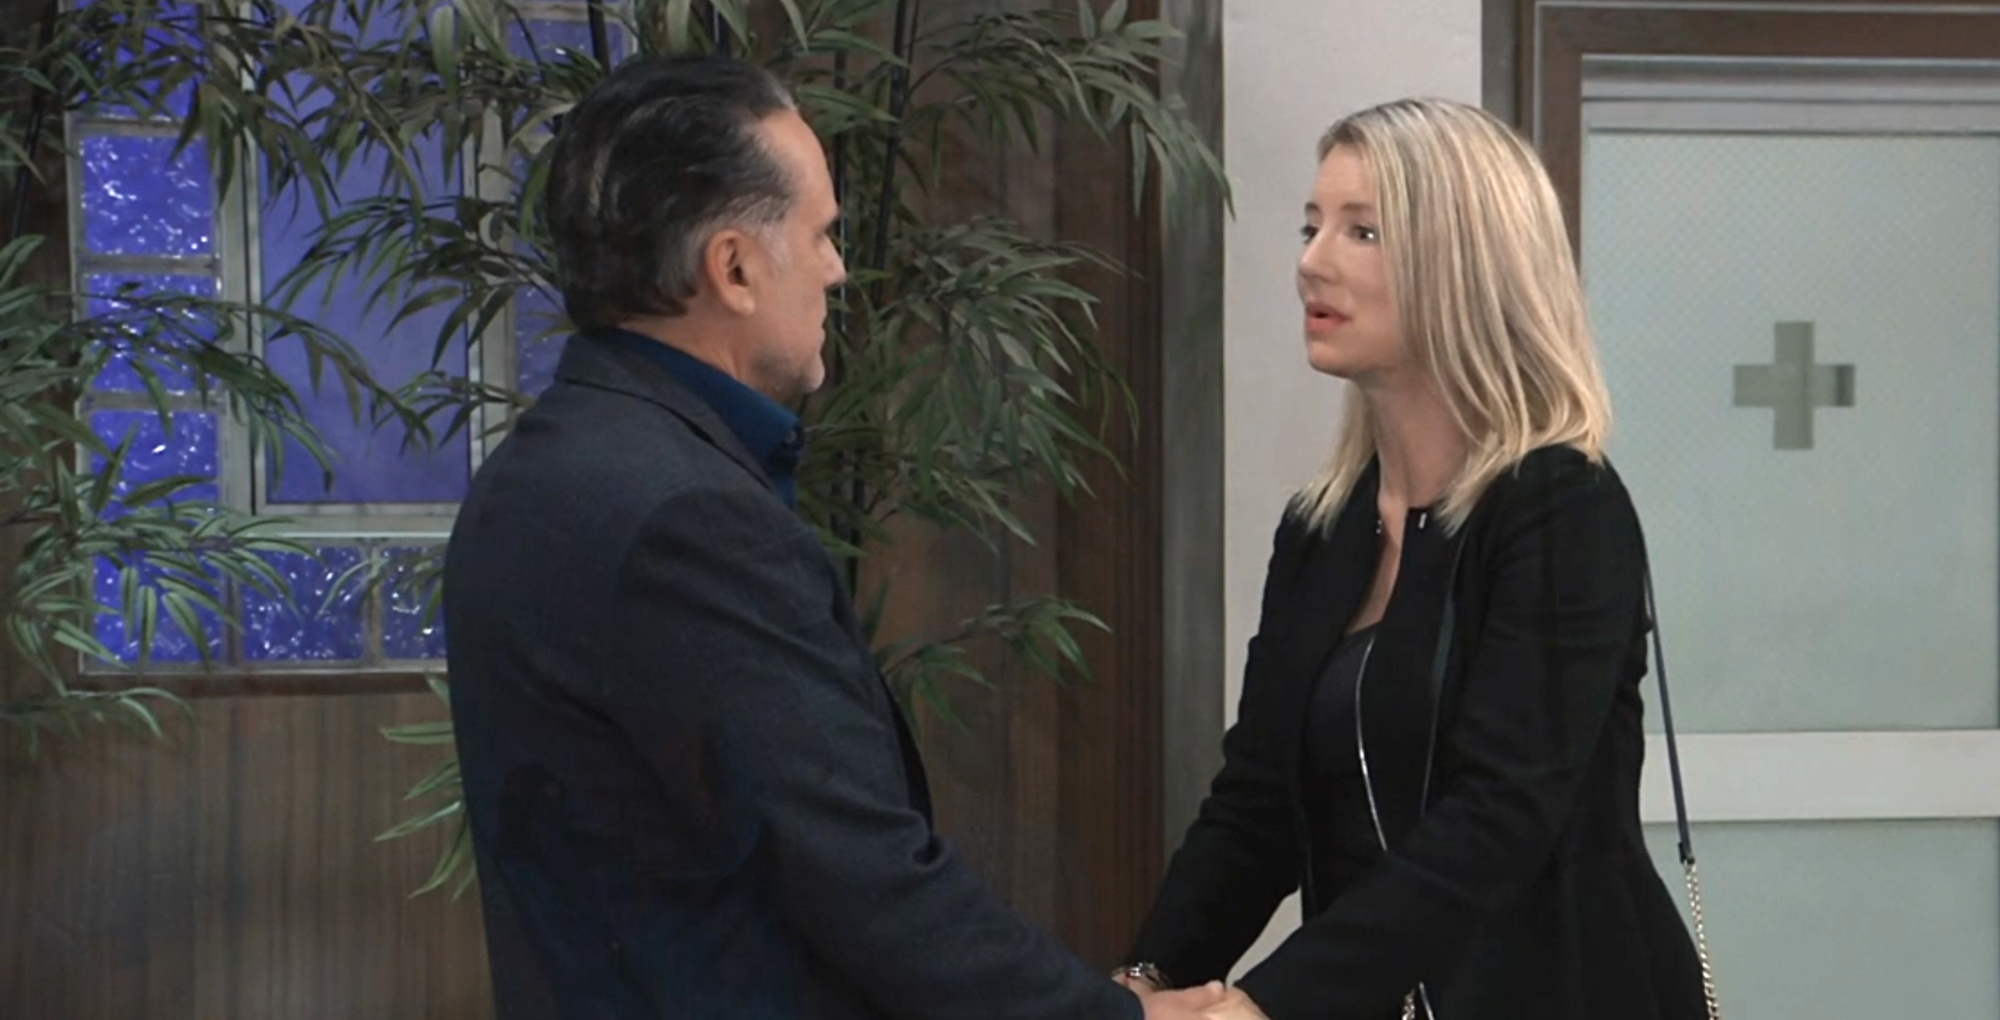 the general hospital recap for june 15 2023 has nina reeves ready to tell sonny everything.